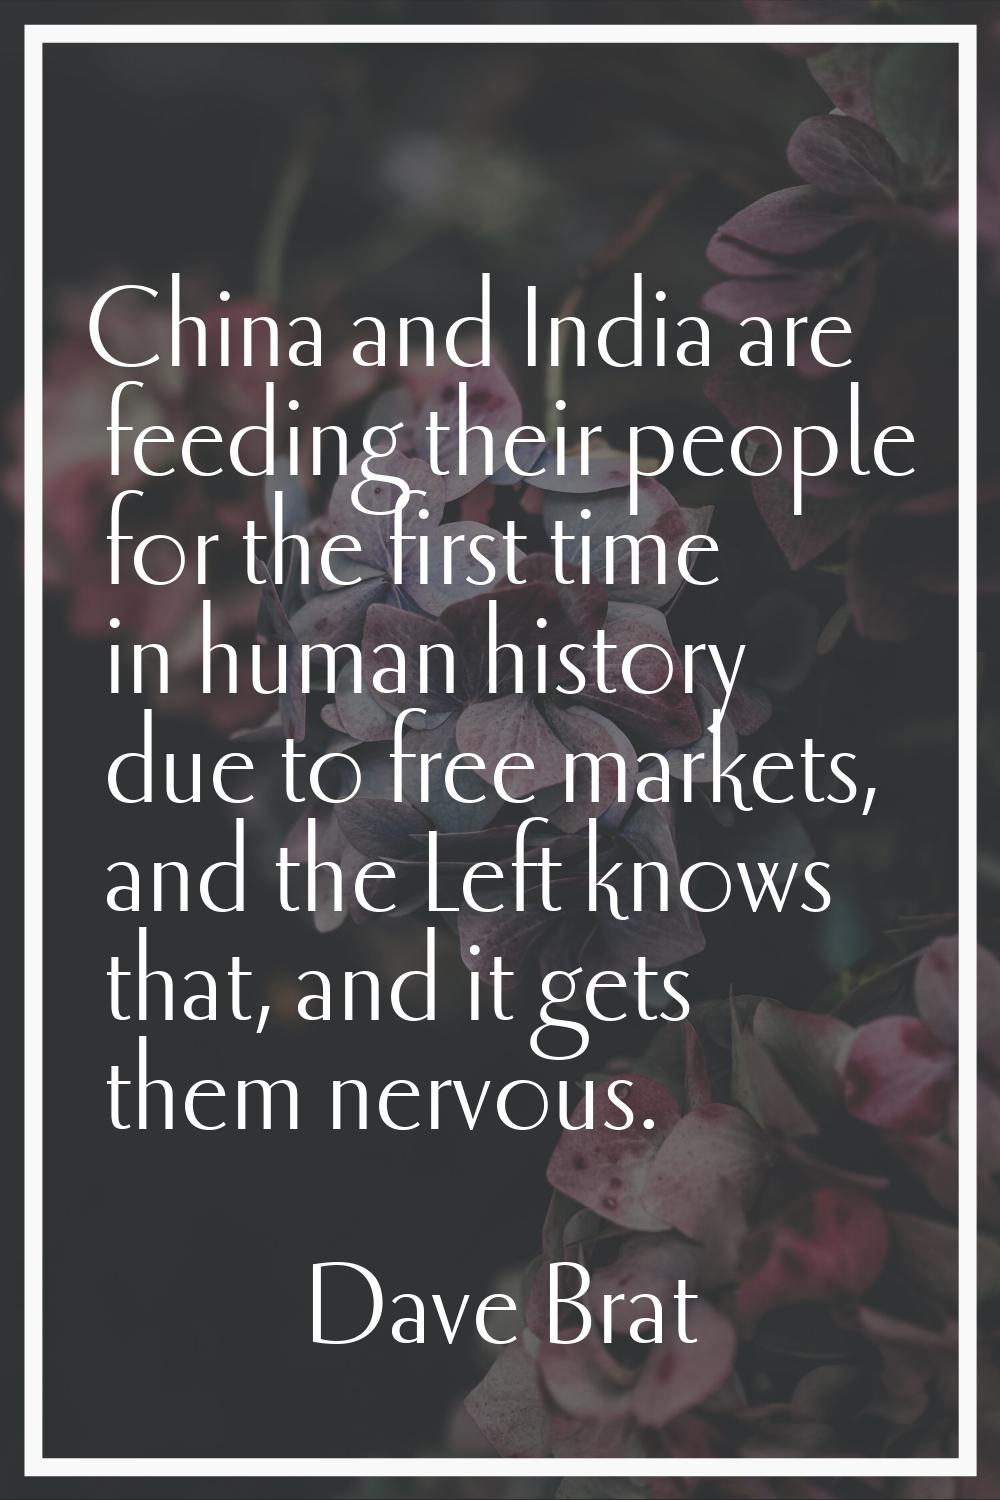 China and India are feeding their people for the first time in human history due to free markets, a